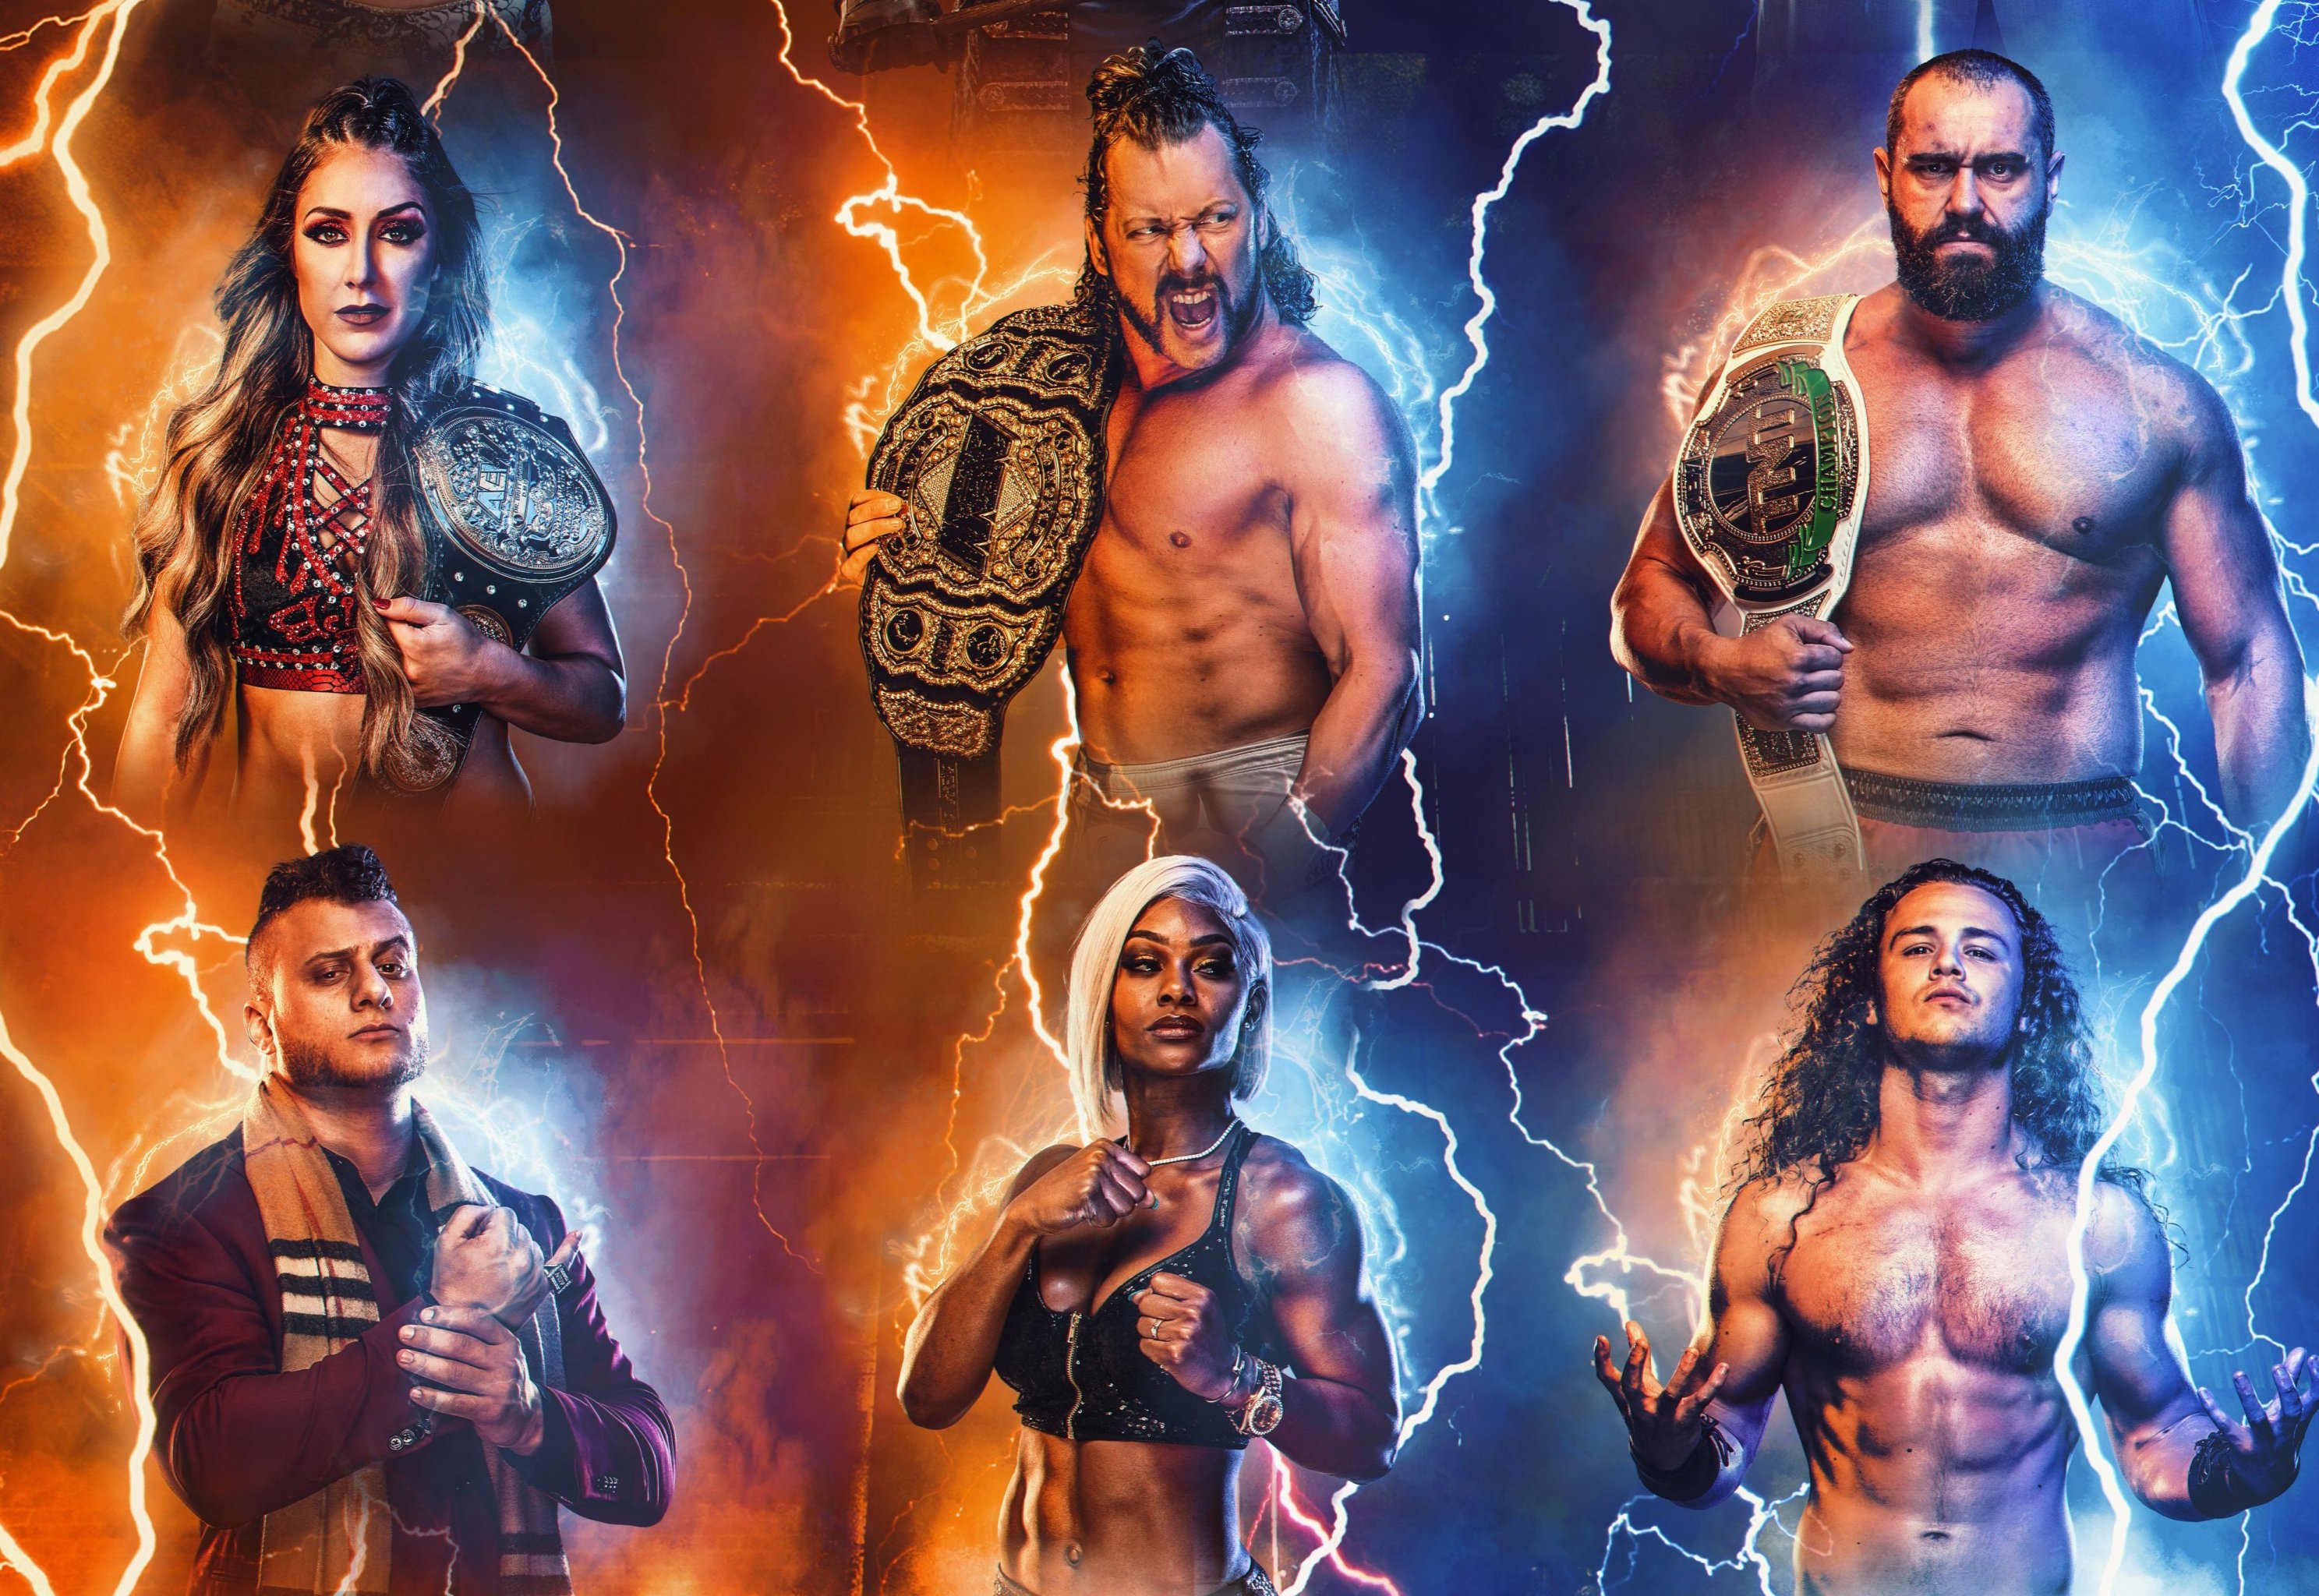 AEW Rampage Results Winners, Grades, Reaction and Highlights from